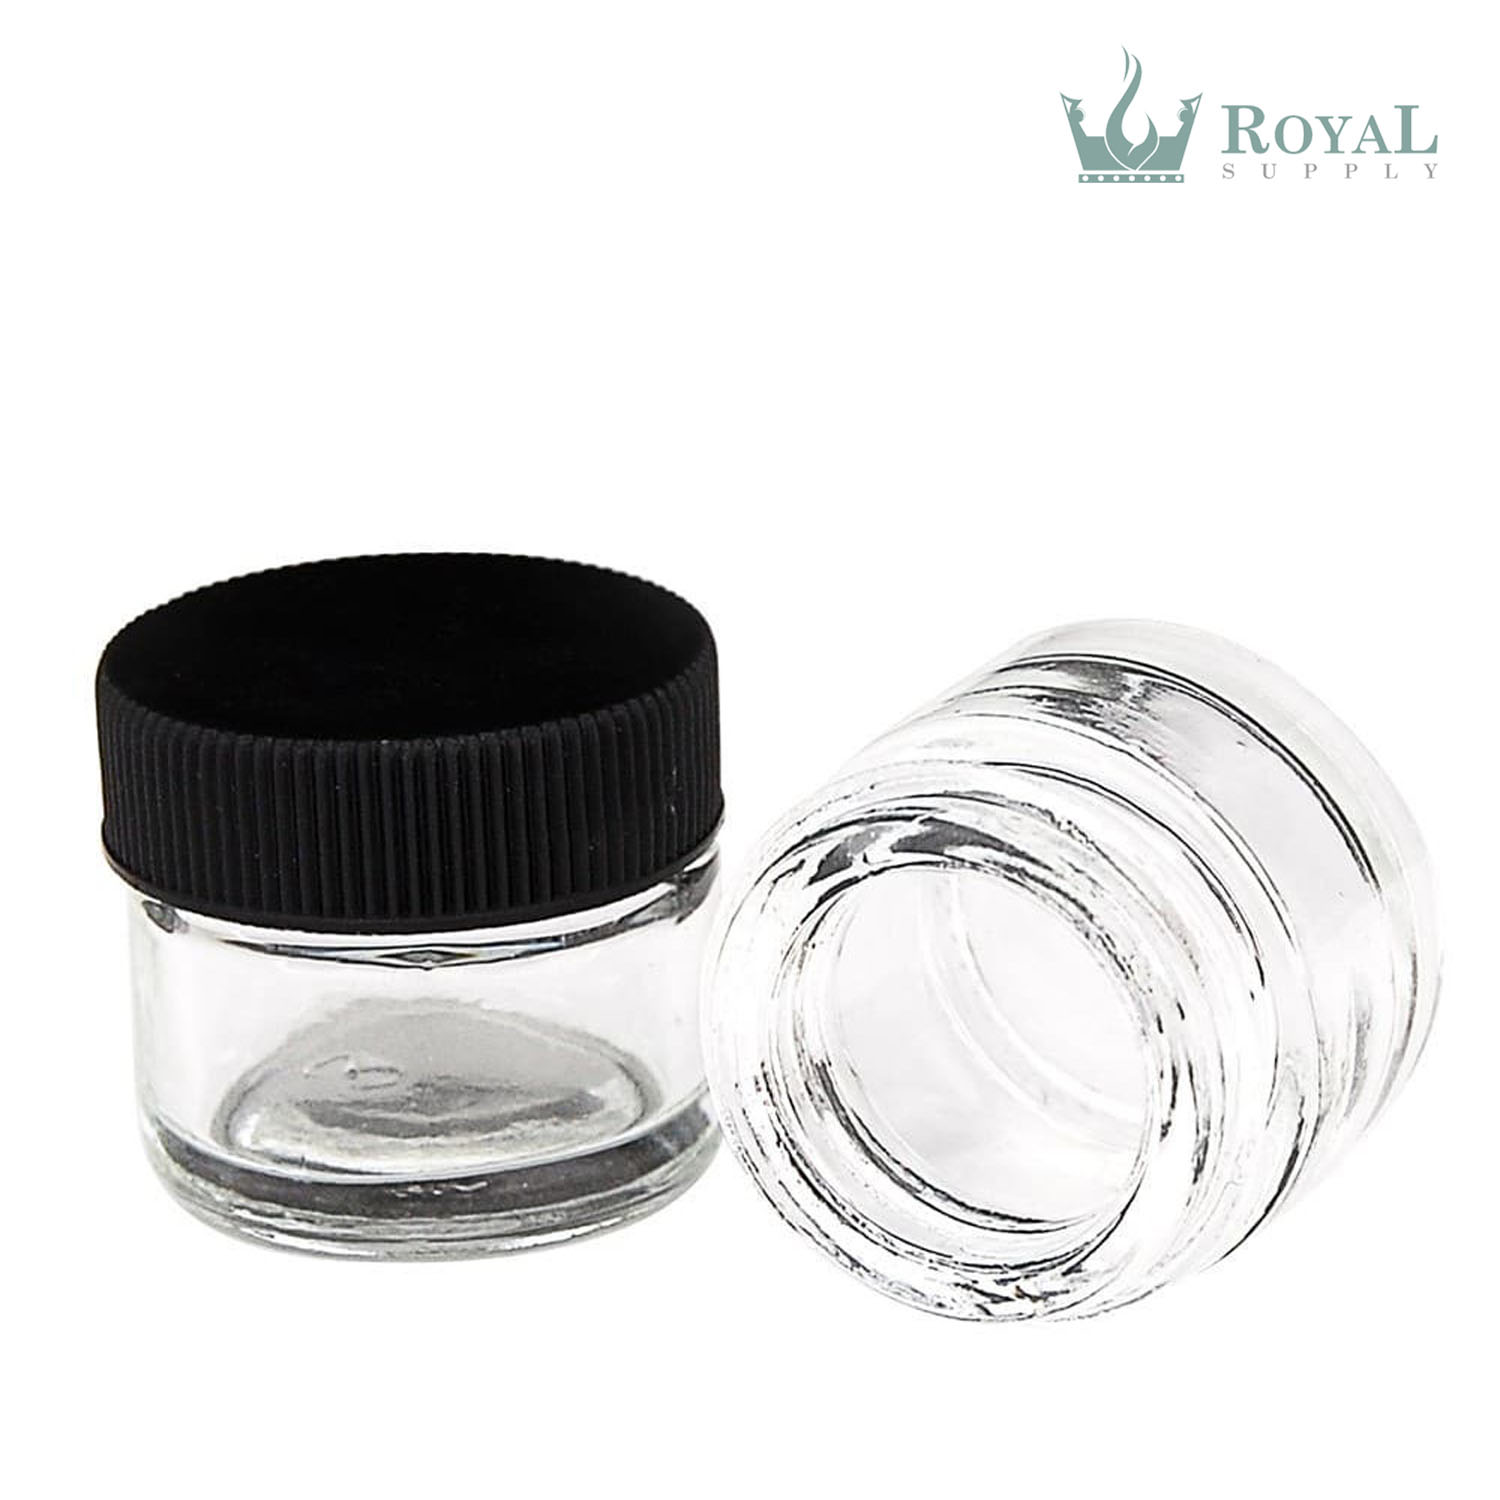 5ml Glass Concentrate Container with Screw Cap Lid